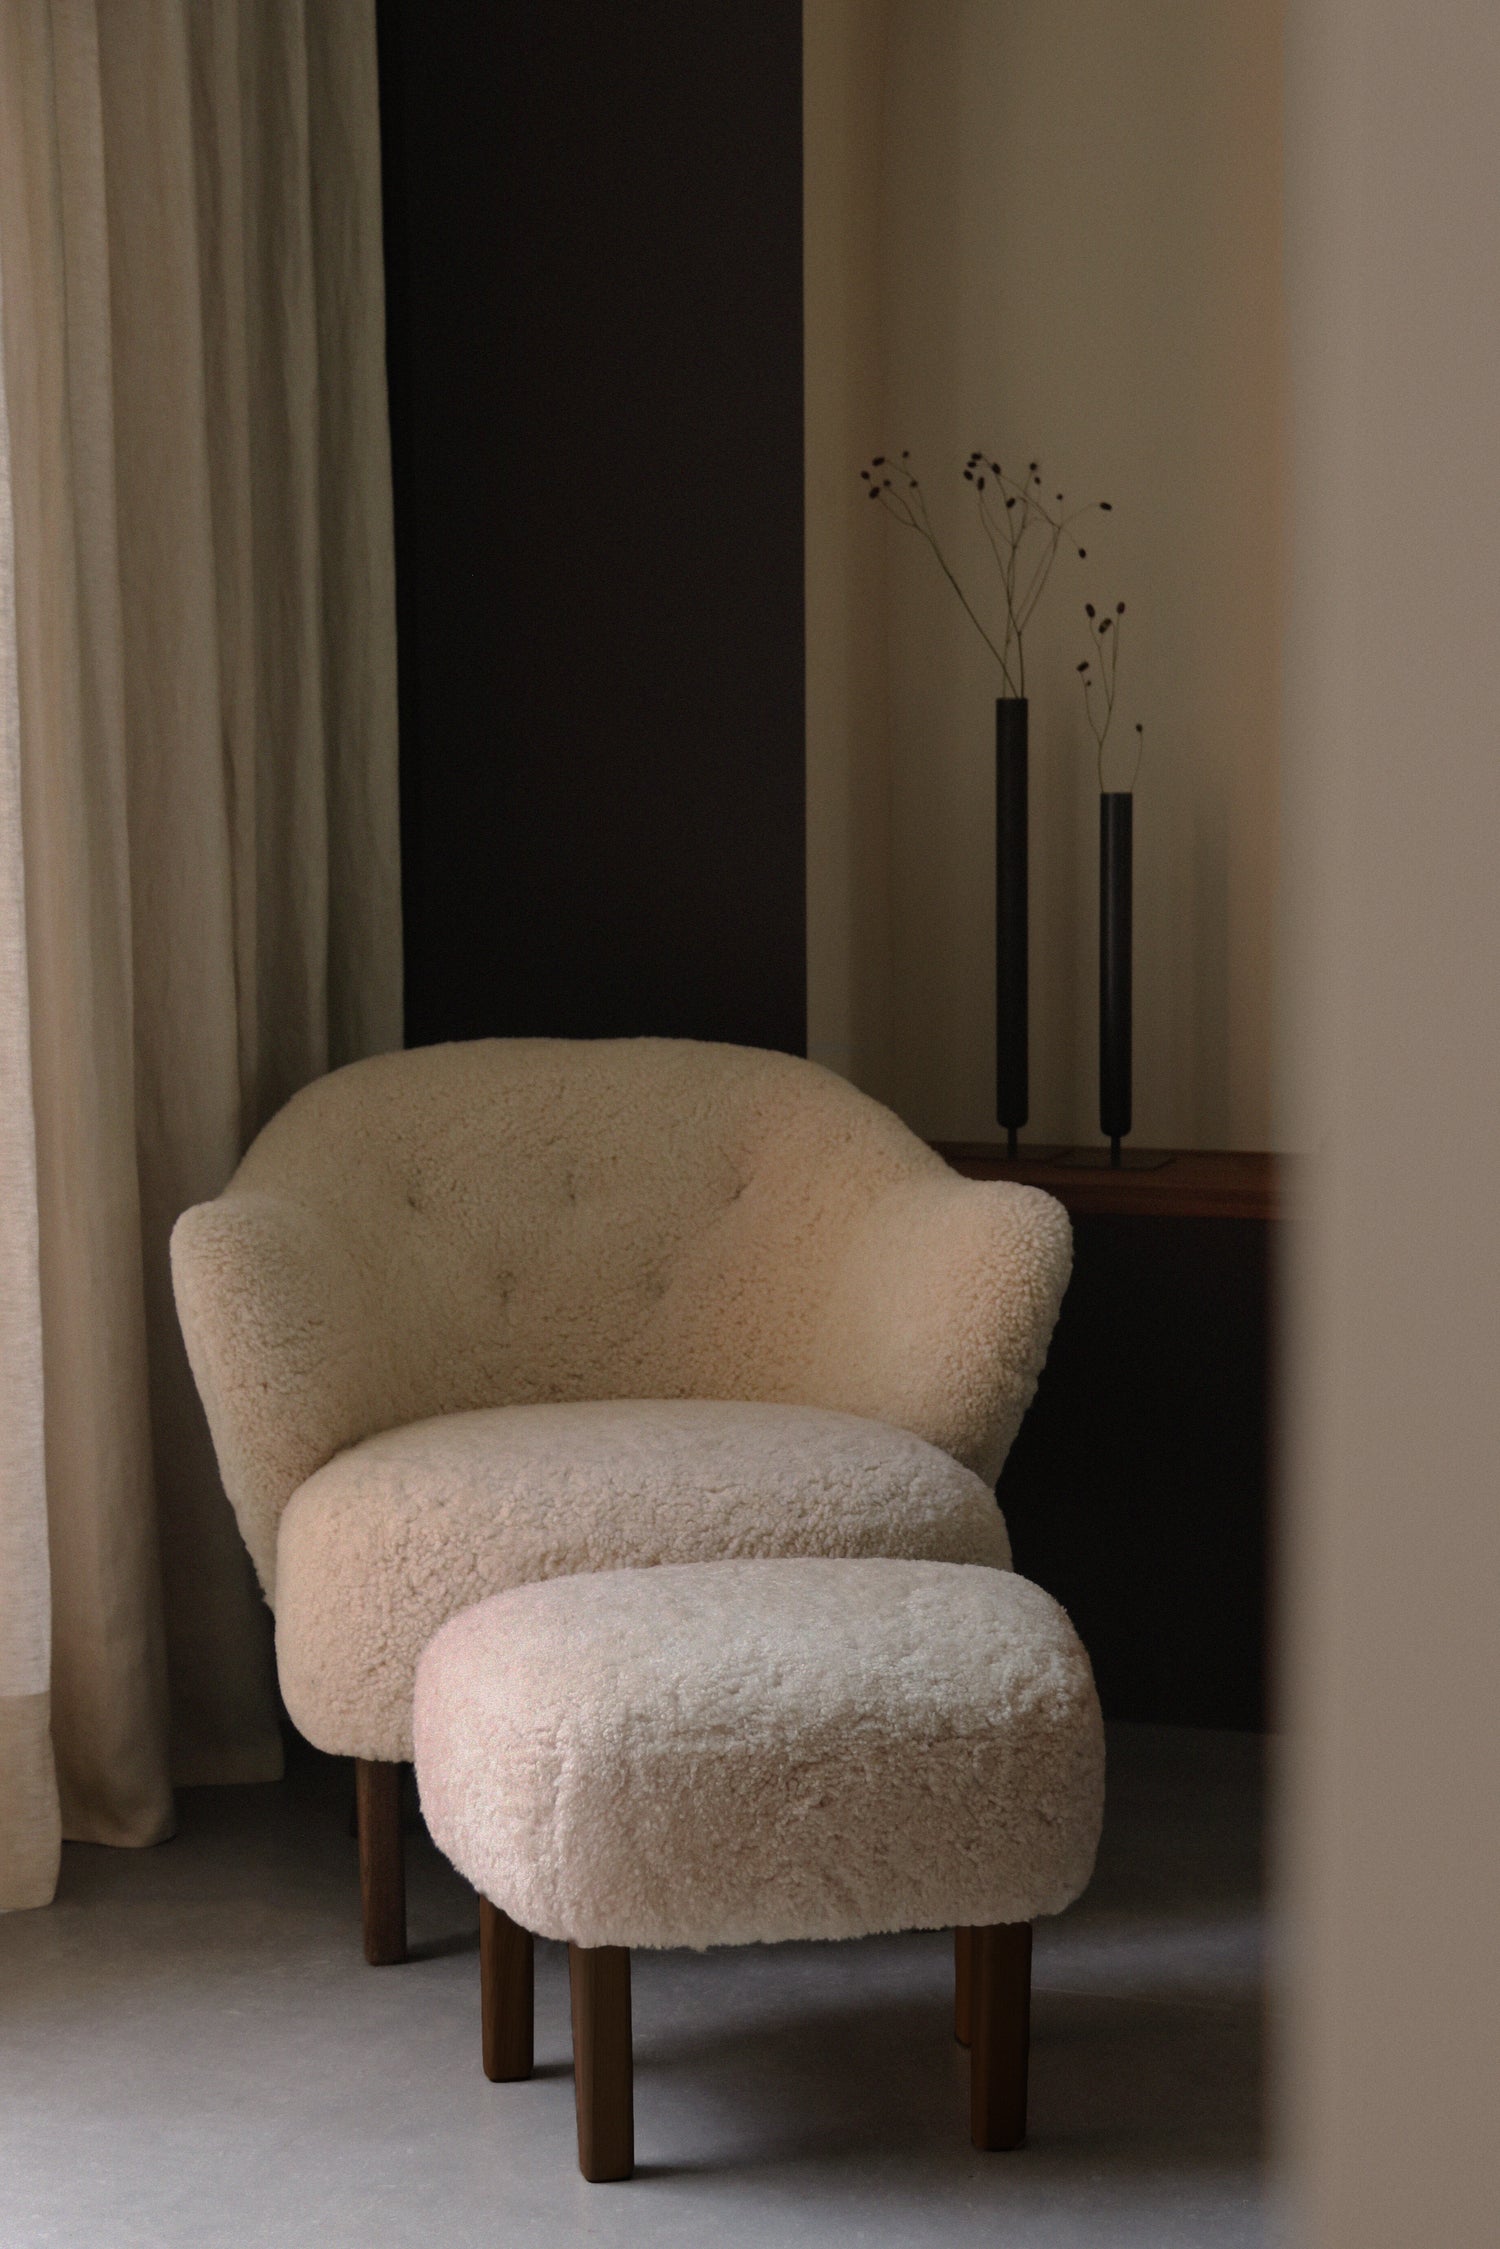 The Ingeborg Ottoman and chair in Sheepskin moonlight together. By Audo CPH.